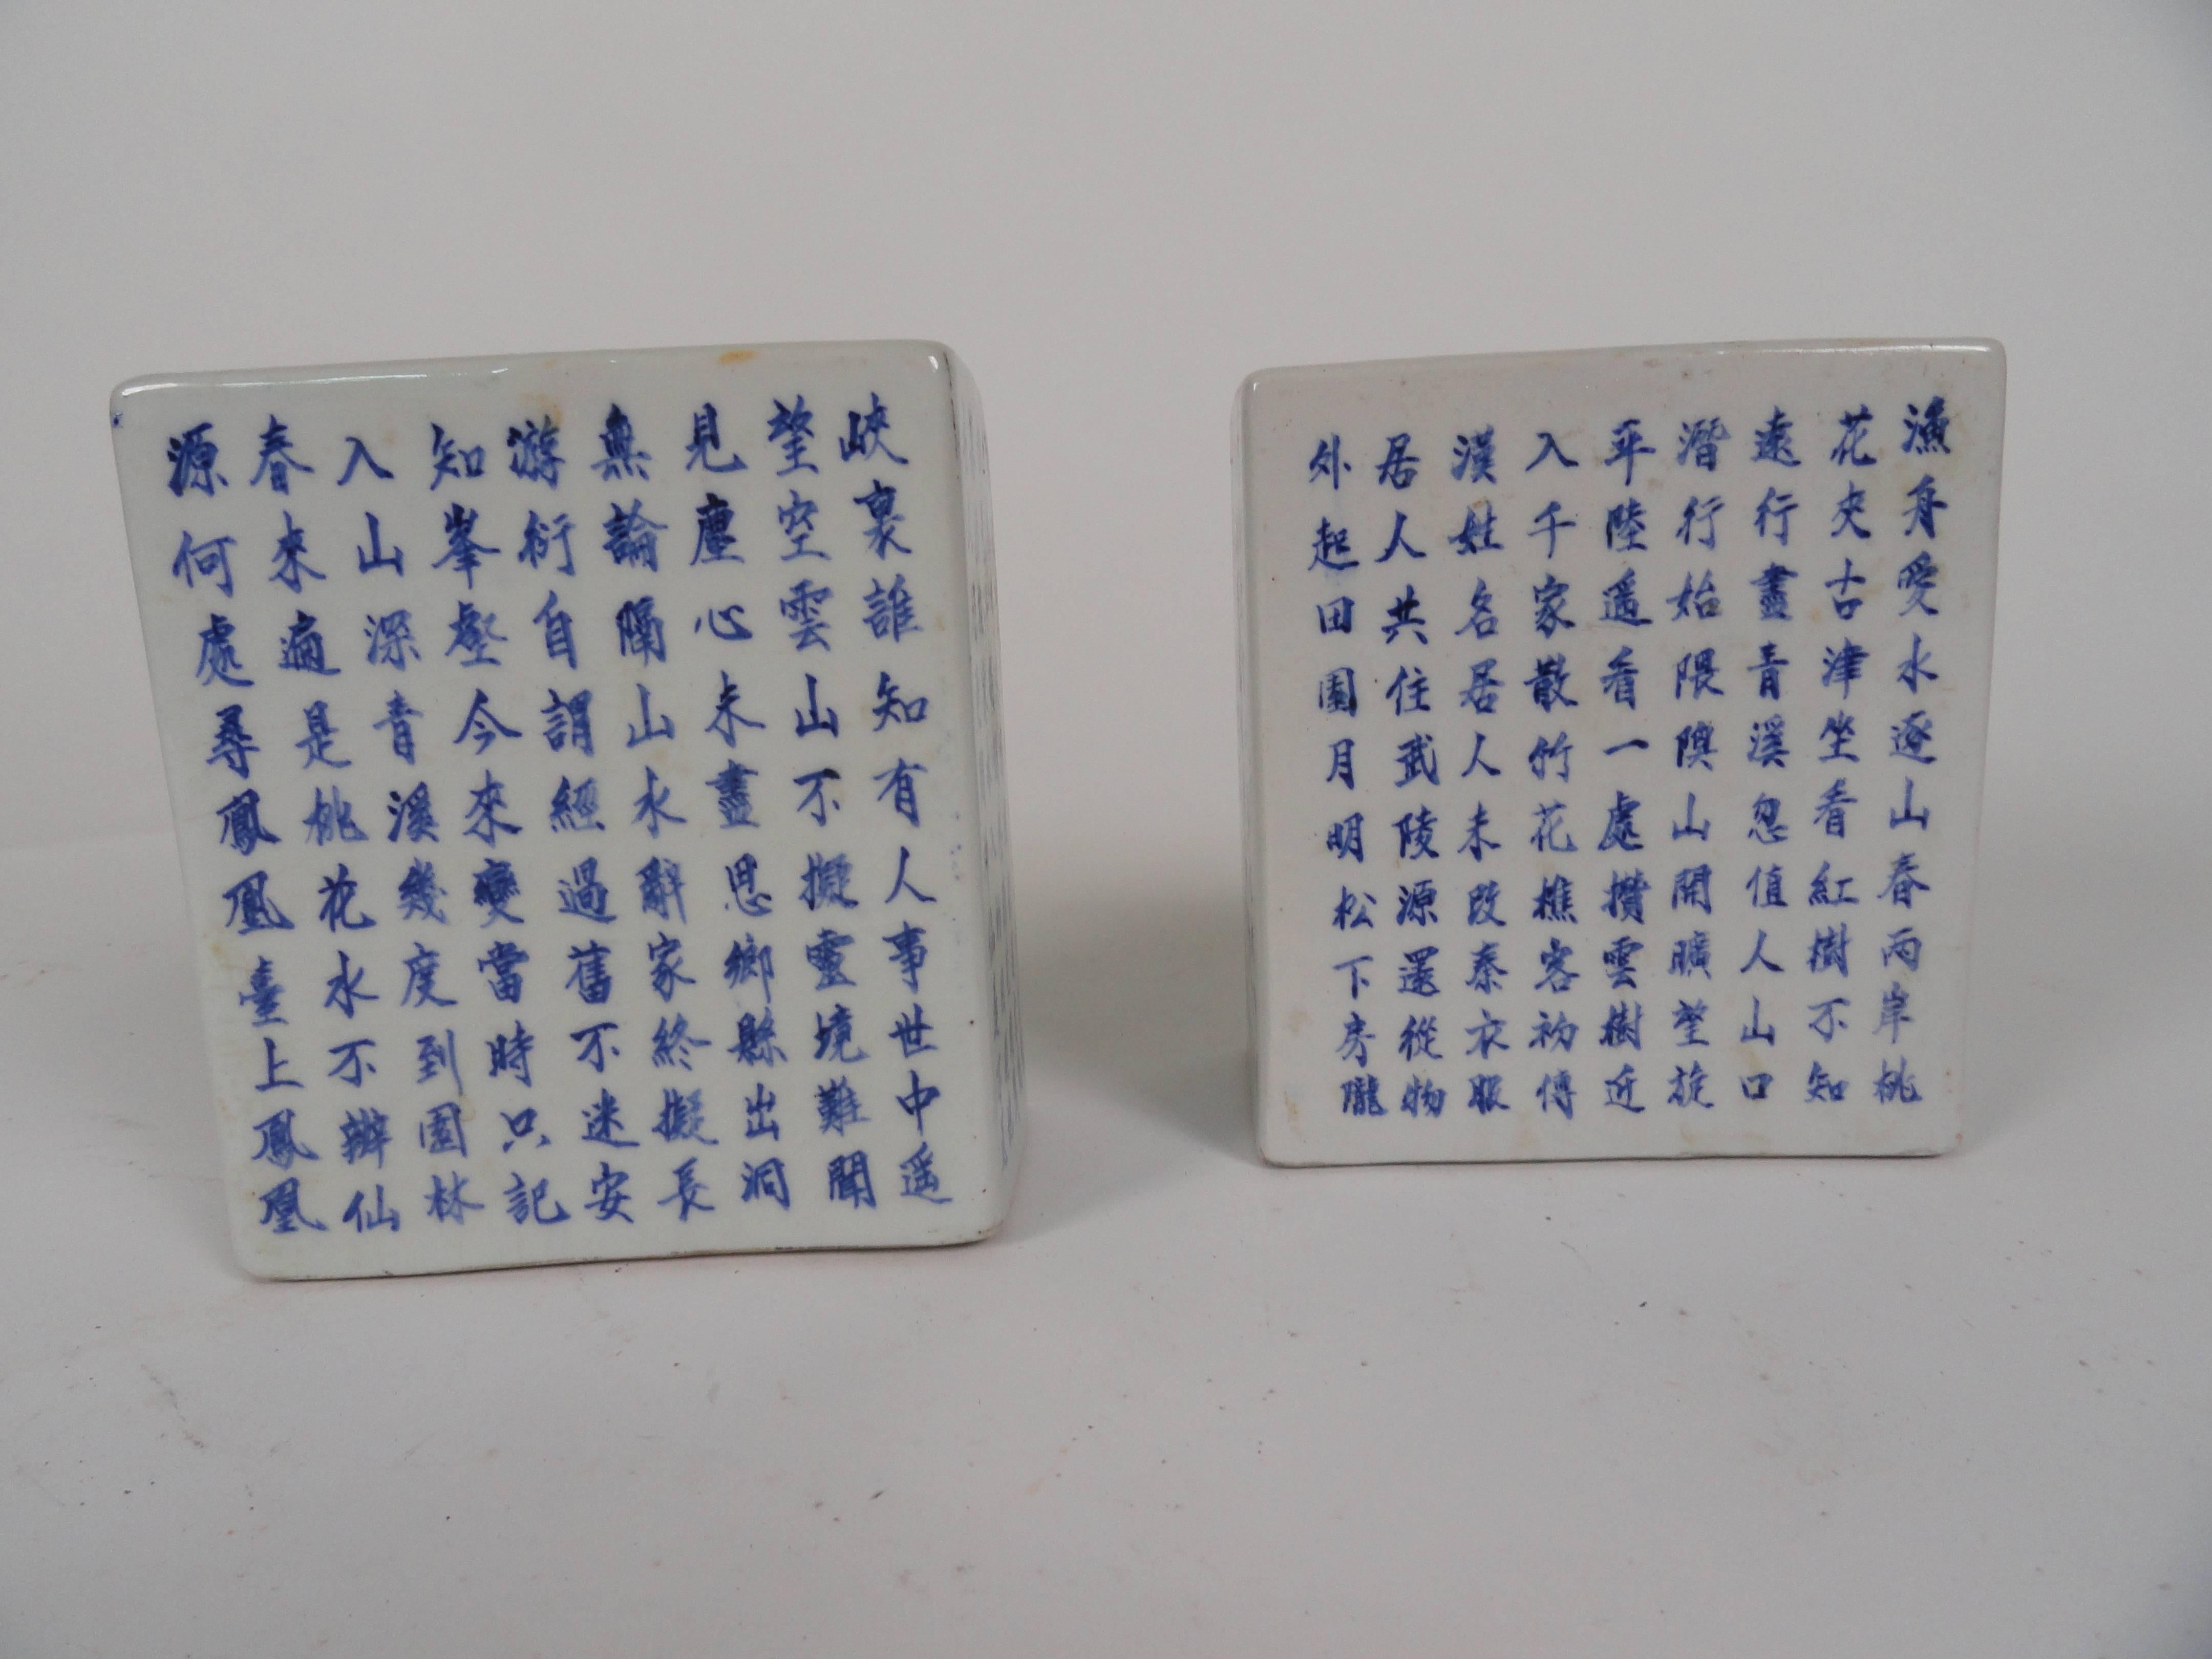 Pair of 19th century oriental ceramic scholar boxes with an off-white finish and characters in blue on all sides. 
Scholars boxes may have been used as pillows. Rare and unusual.